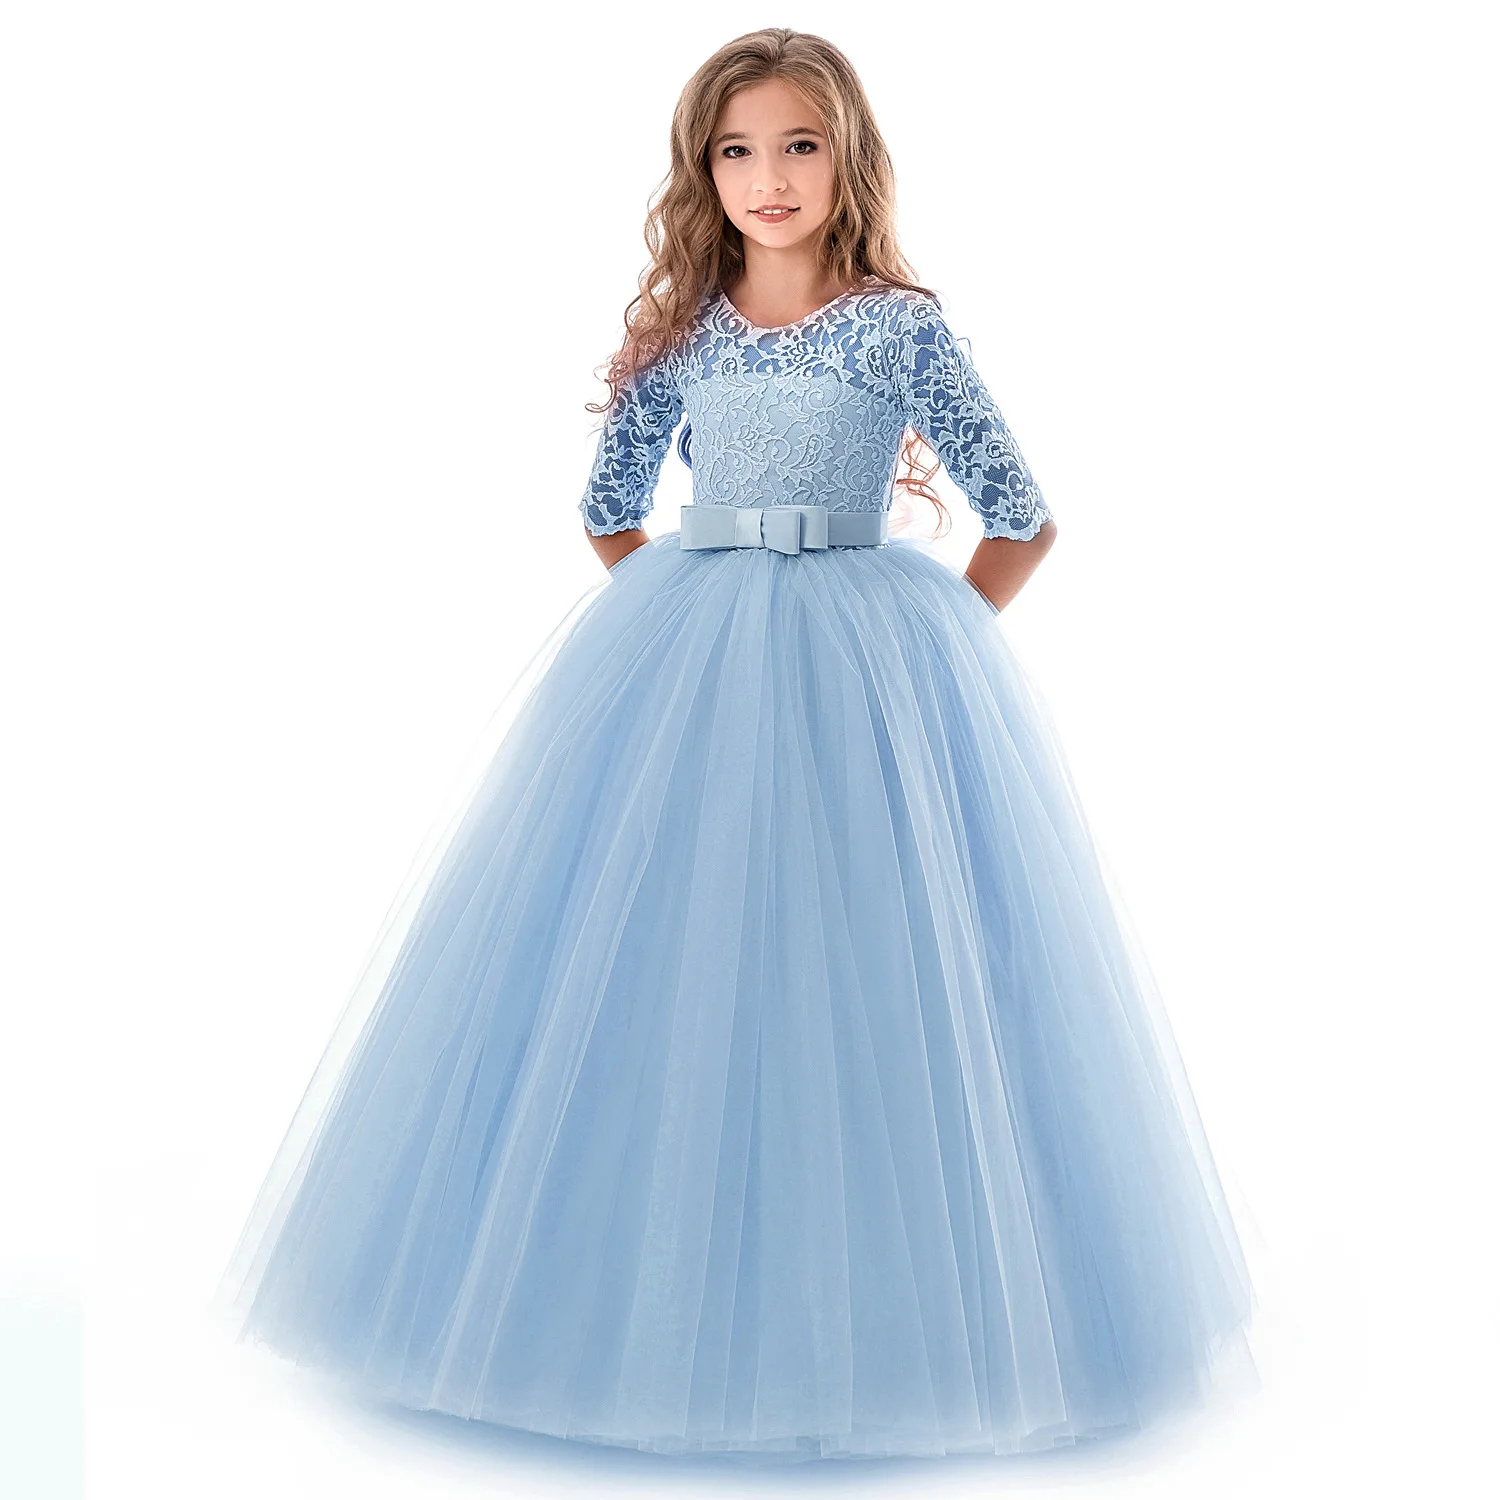 

Tulle Lace Applique Long 12 Years Old Girls Wedding Dresses Flower Long Sleeve Teenage birthday dress for 11 years girl